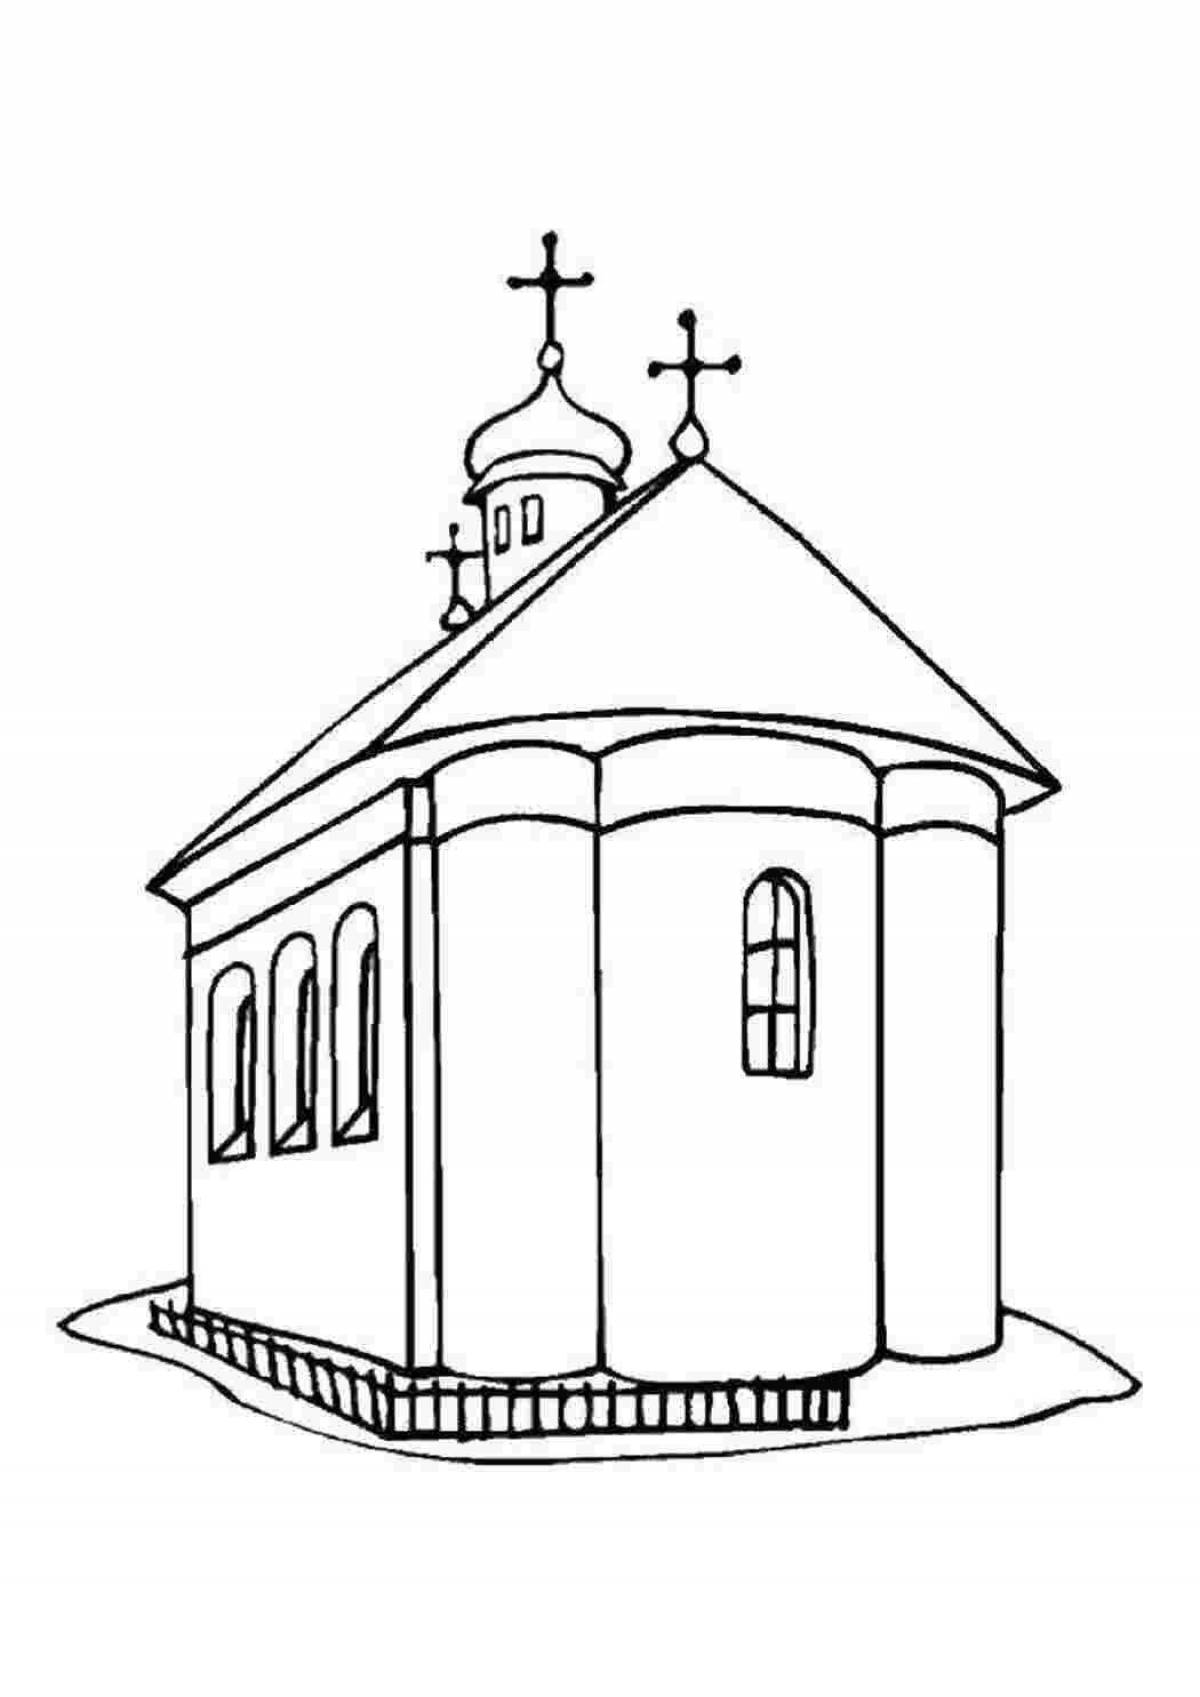 Violent domed church coloring book for kids